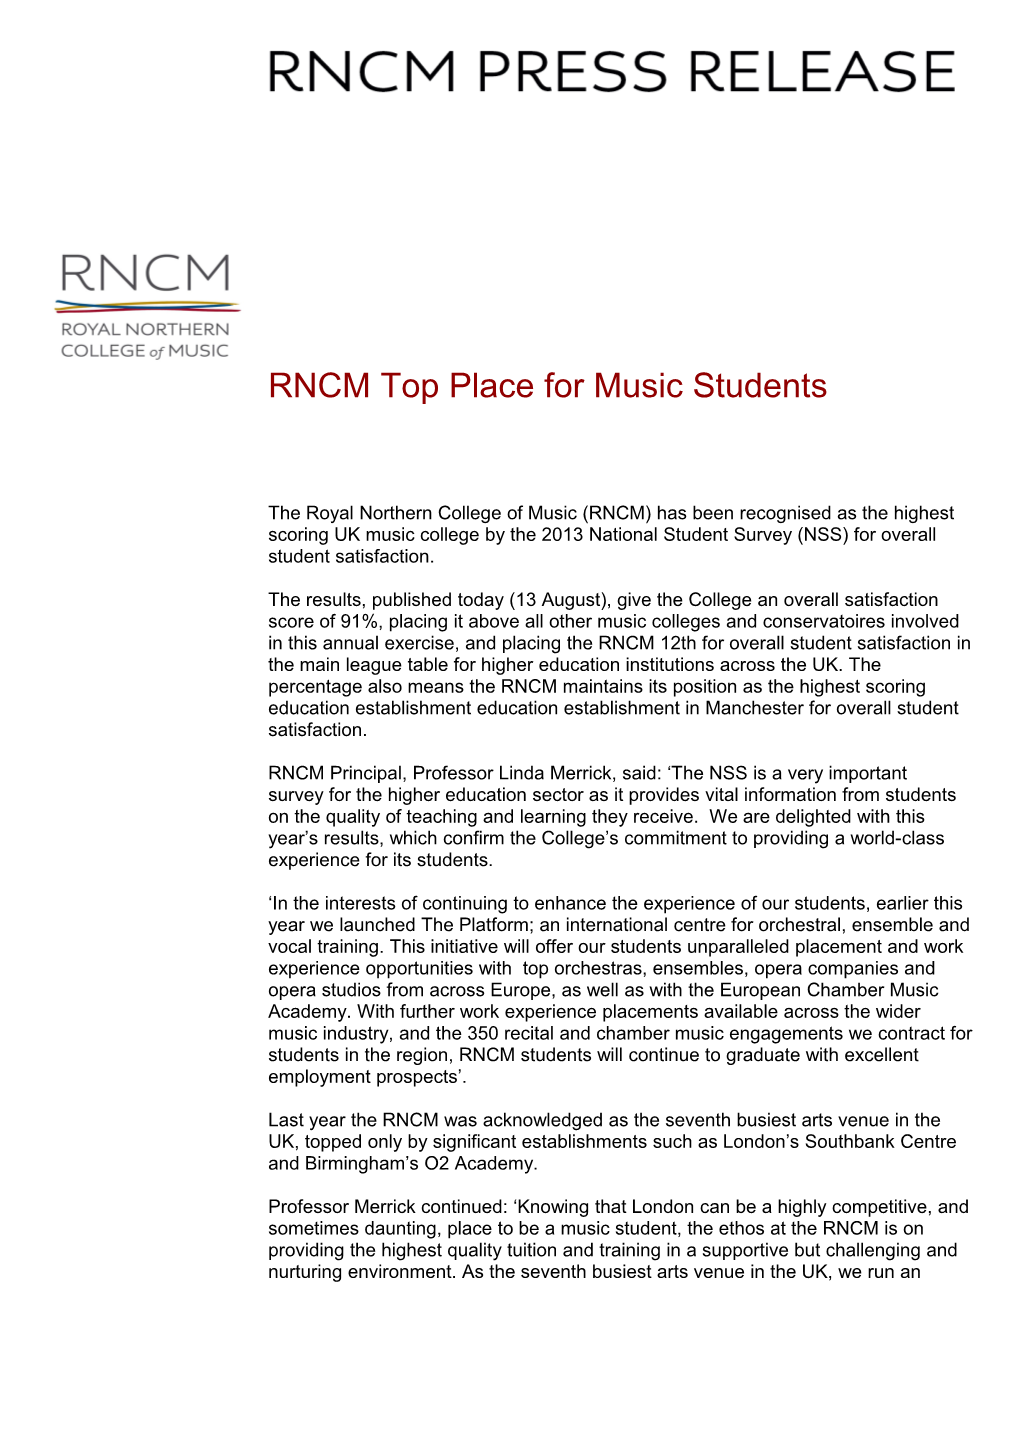 RNCM Top Place for Music Students